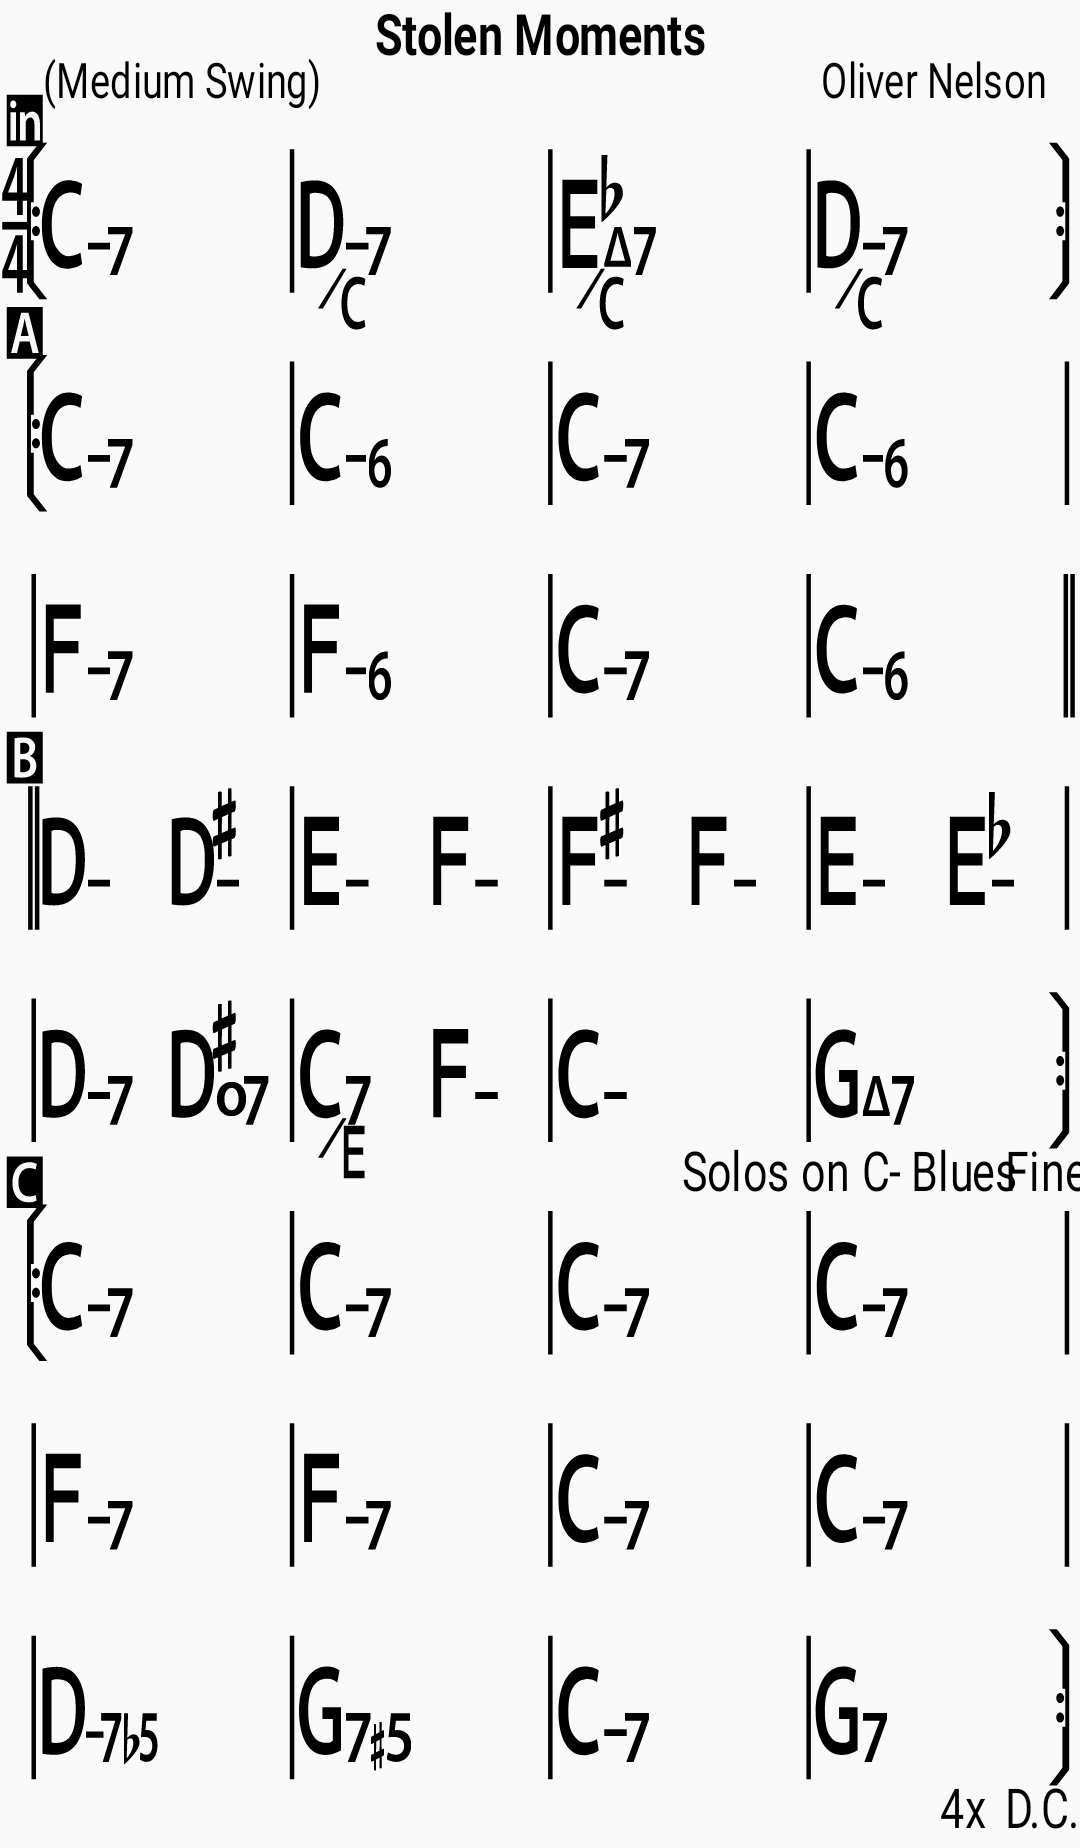 Chord chart for the jazz standard Stolen Moments